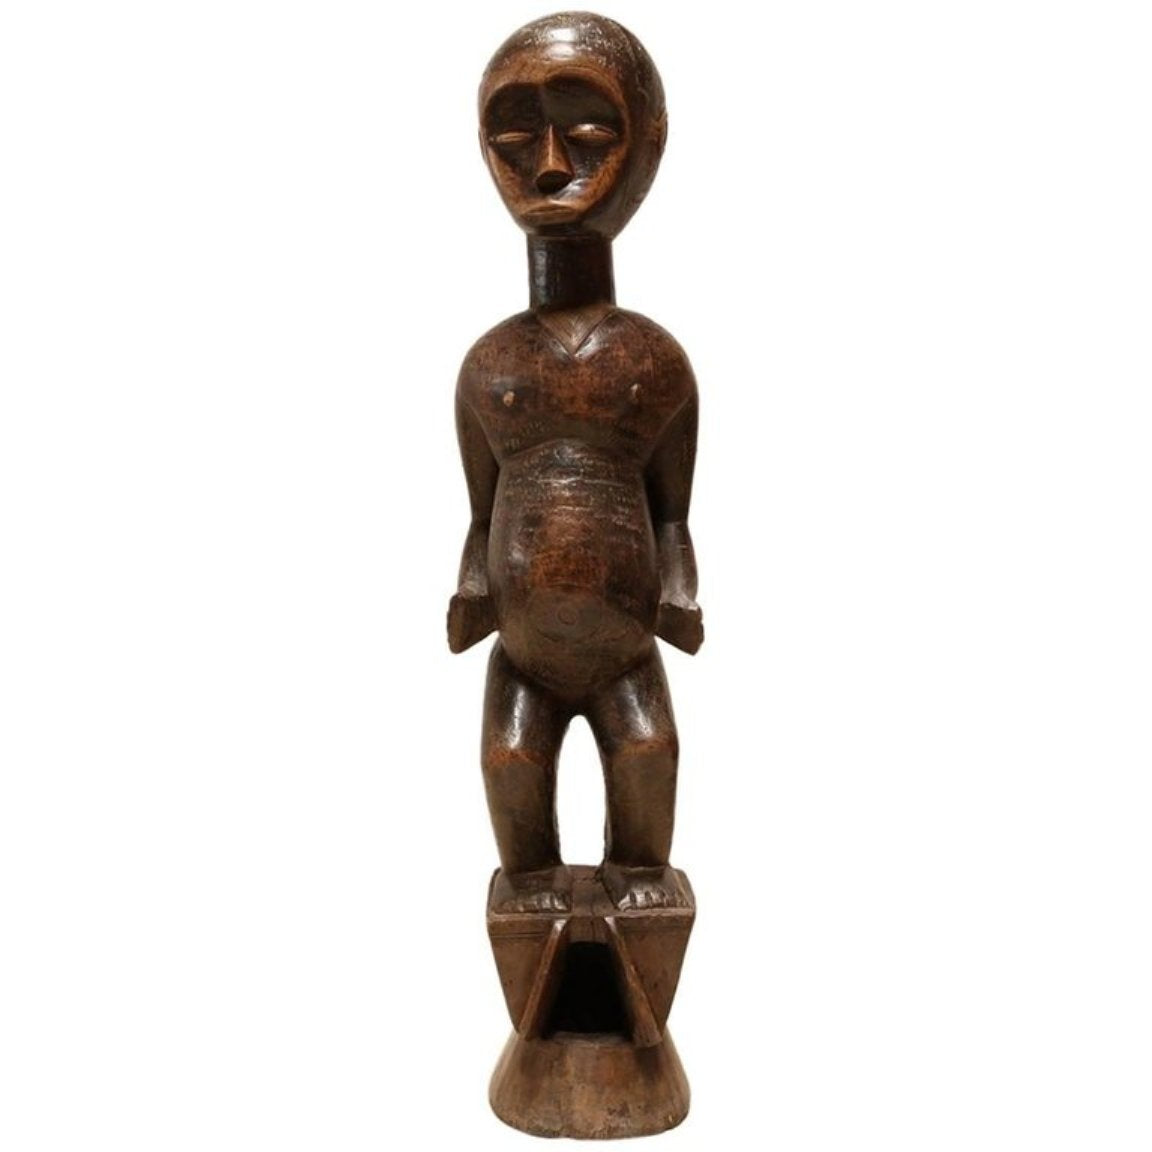 Fertility African Sculpture by the Lobi People